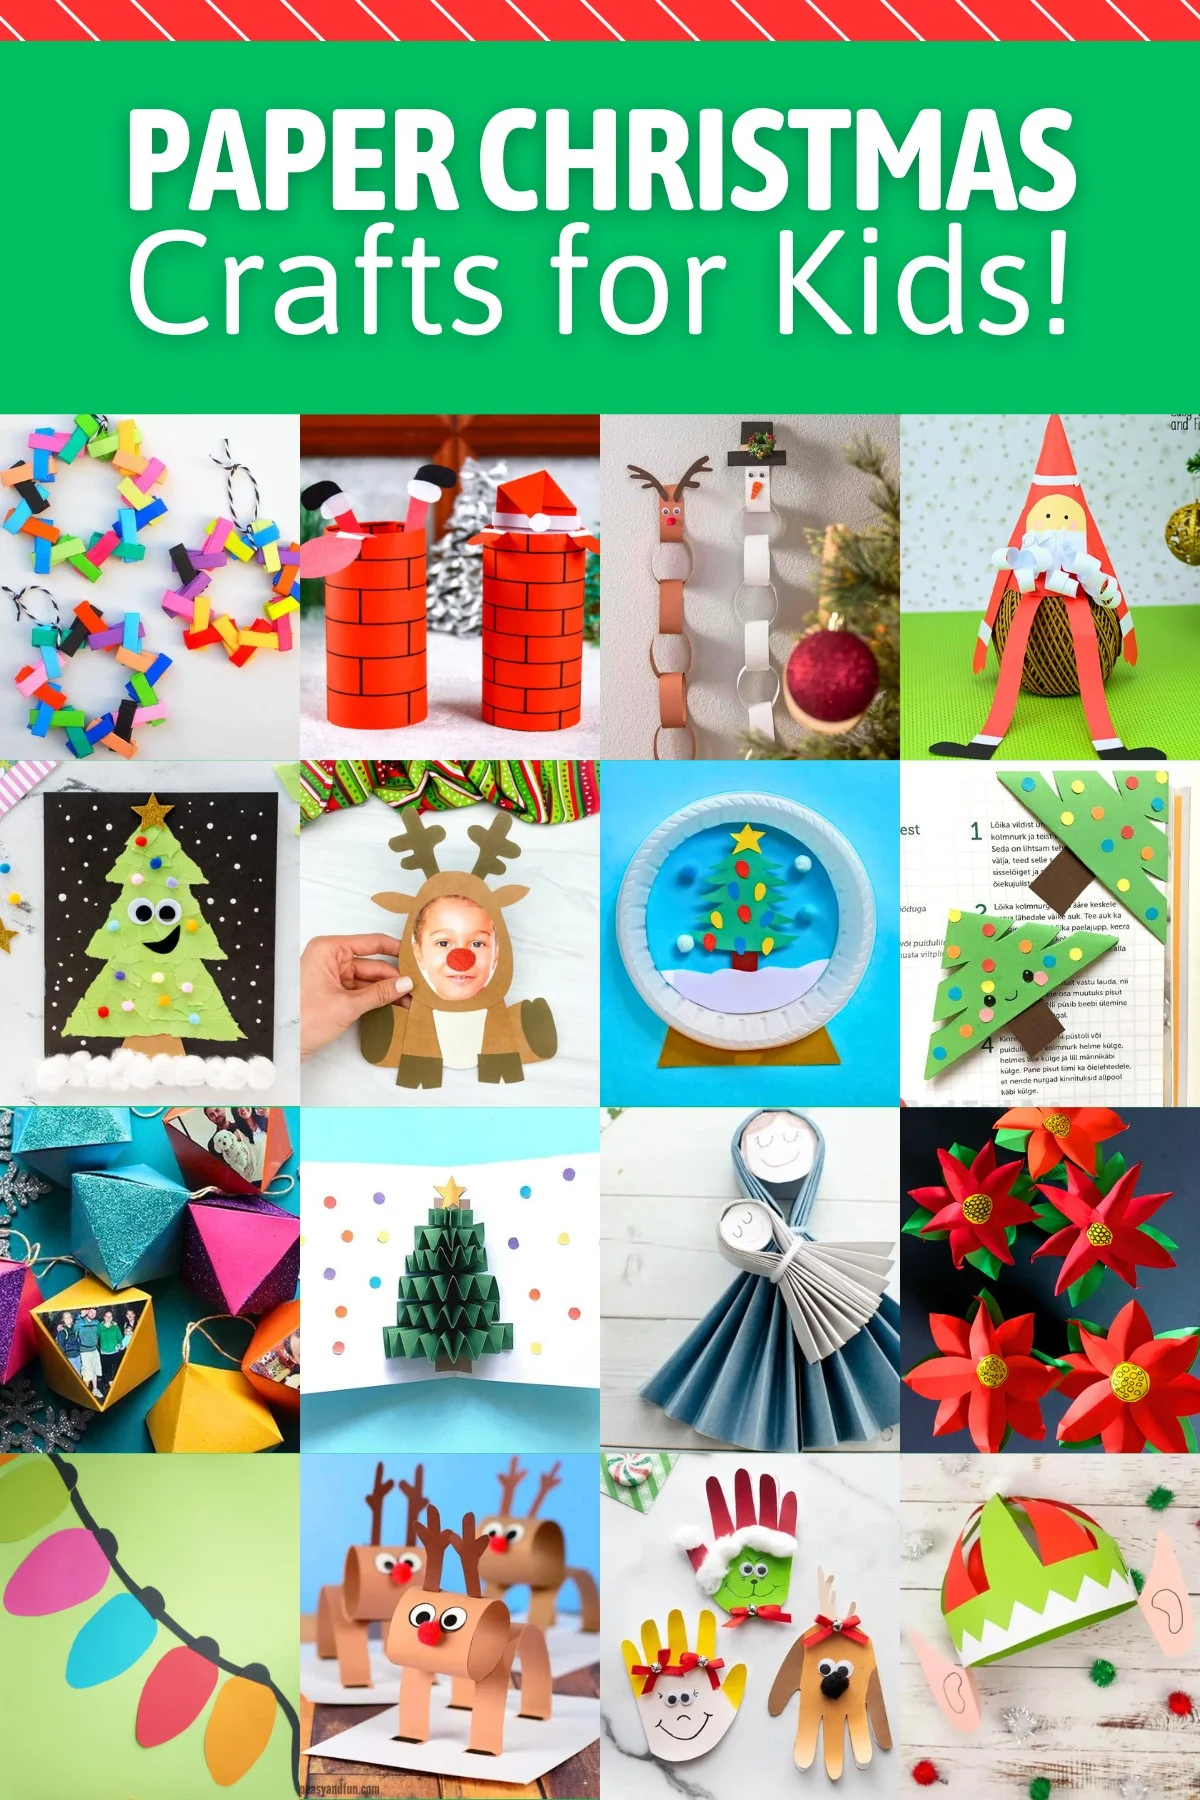 Paper crafts for kids - Gathered